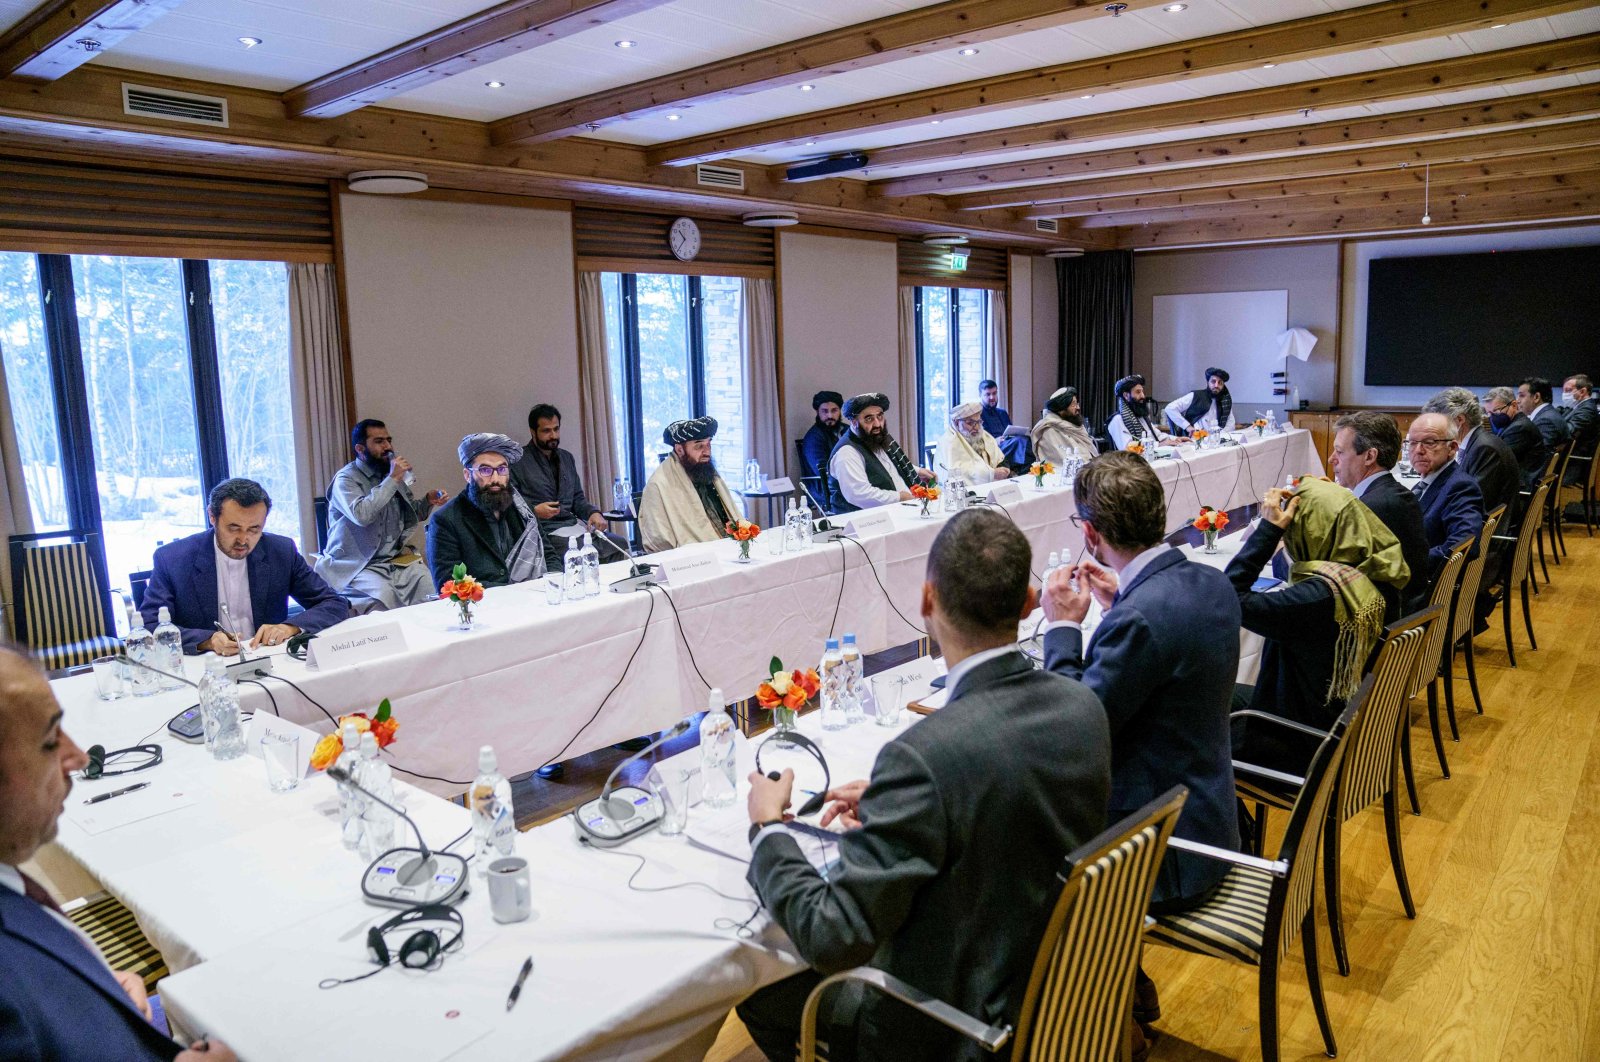 International special representatives and representatives from the Taliban attend a meeting in Oslo, Norway, on Jan. 24, 2022. (AFP Photo)